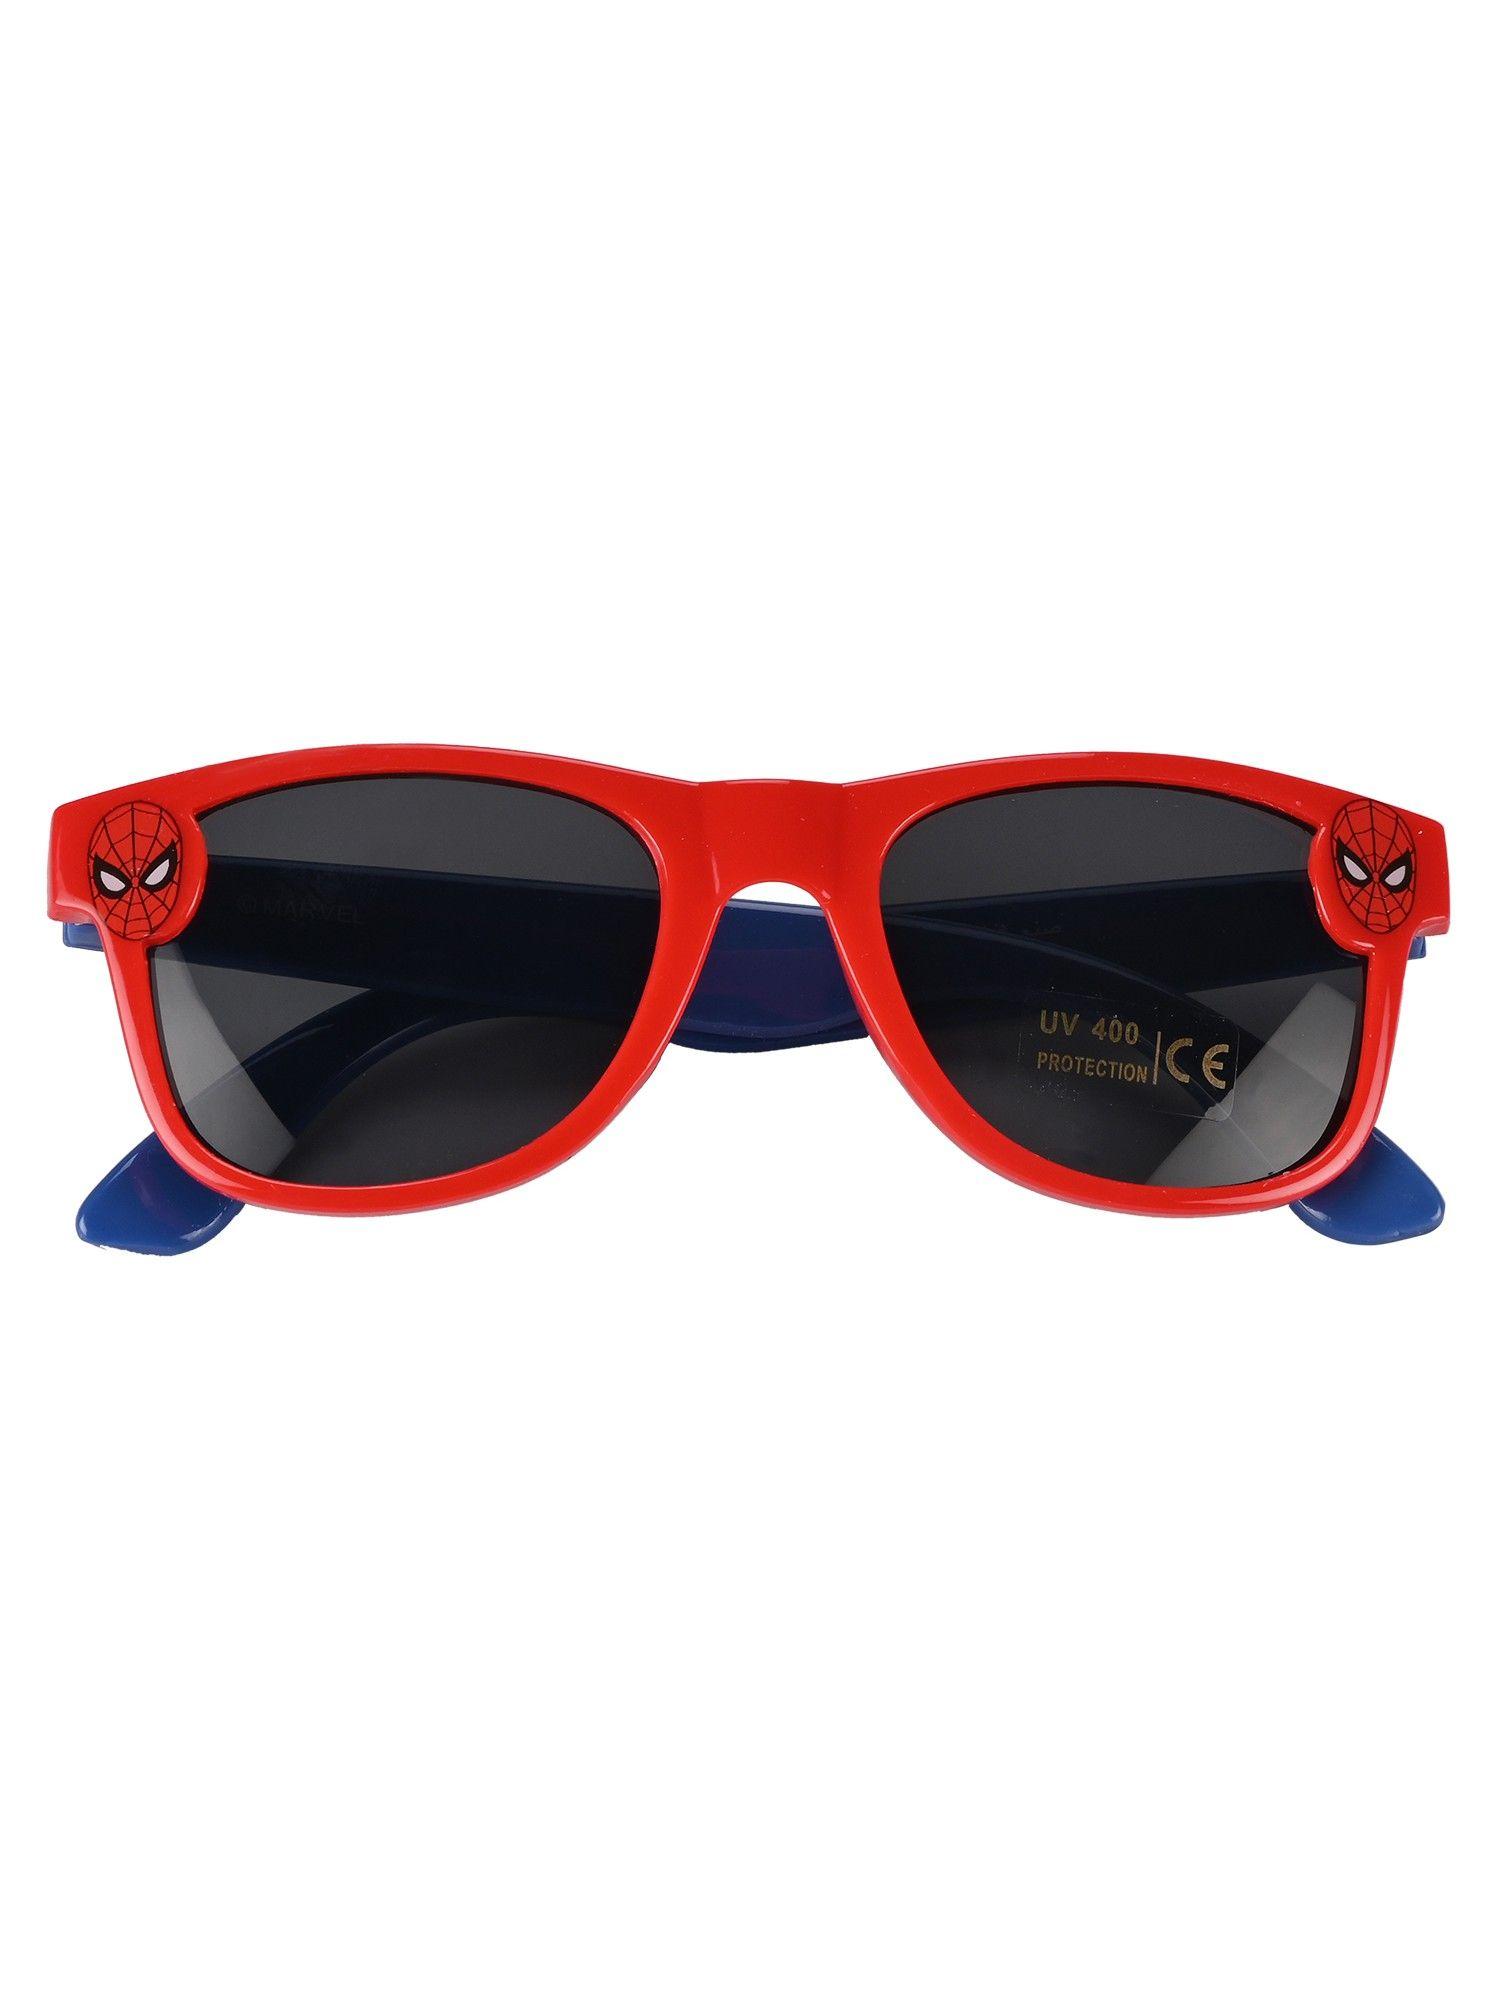 Kids Spiderman Sunglasses With Pouch